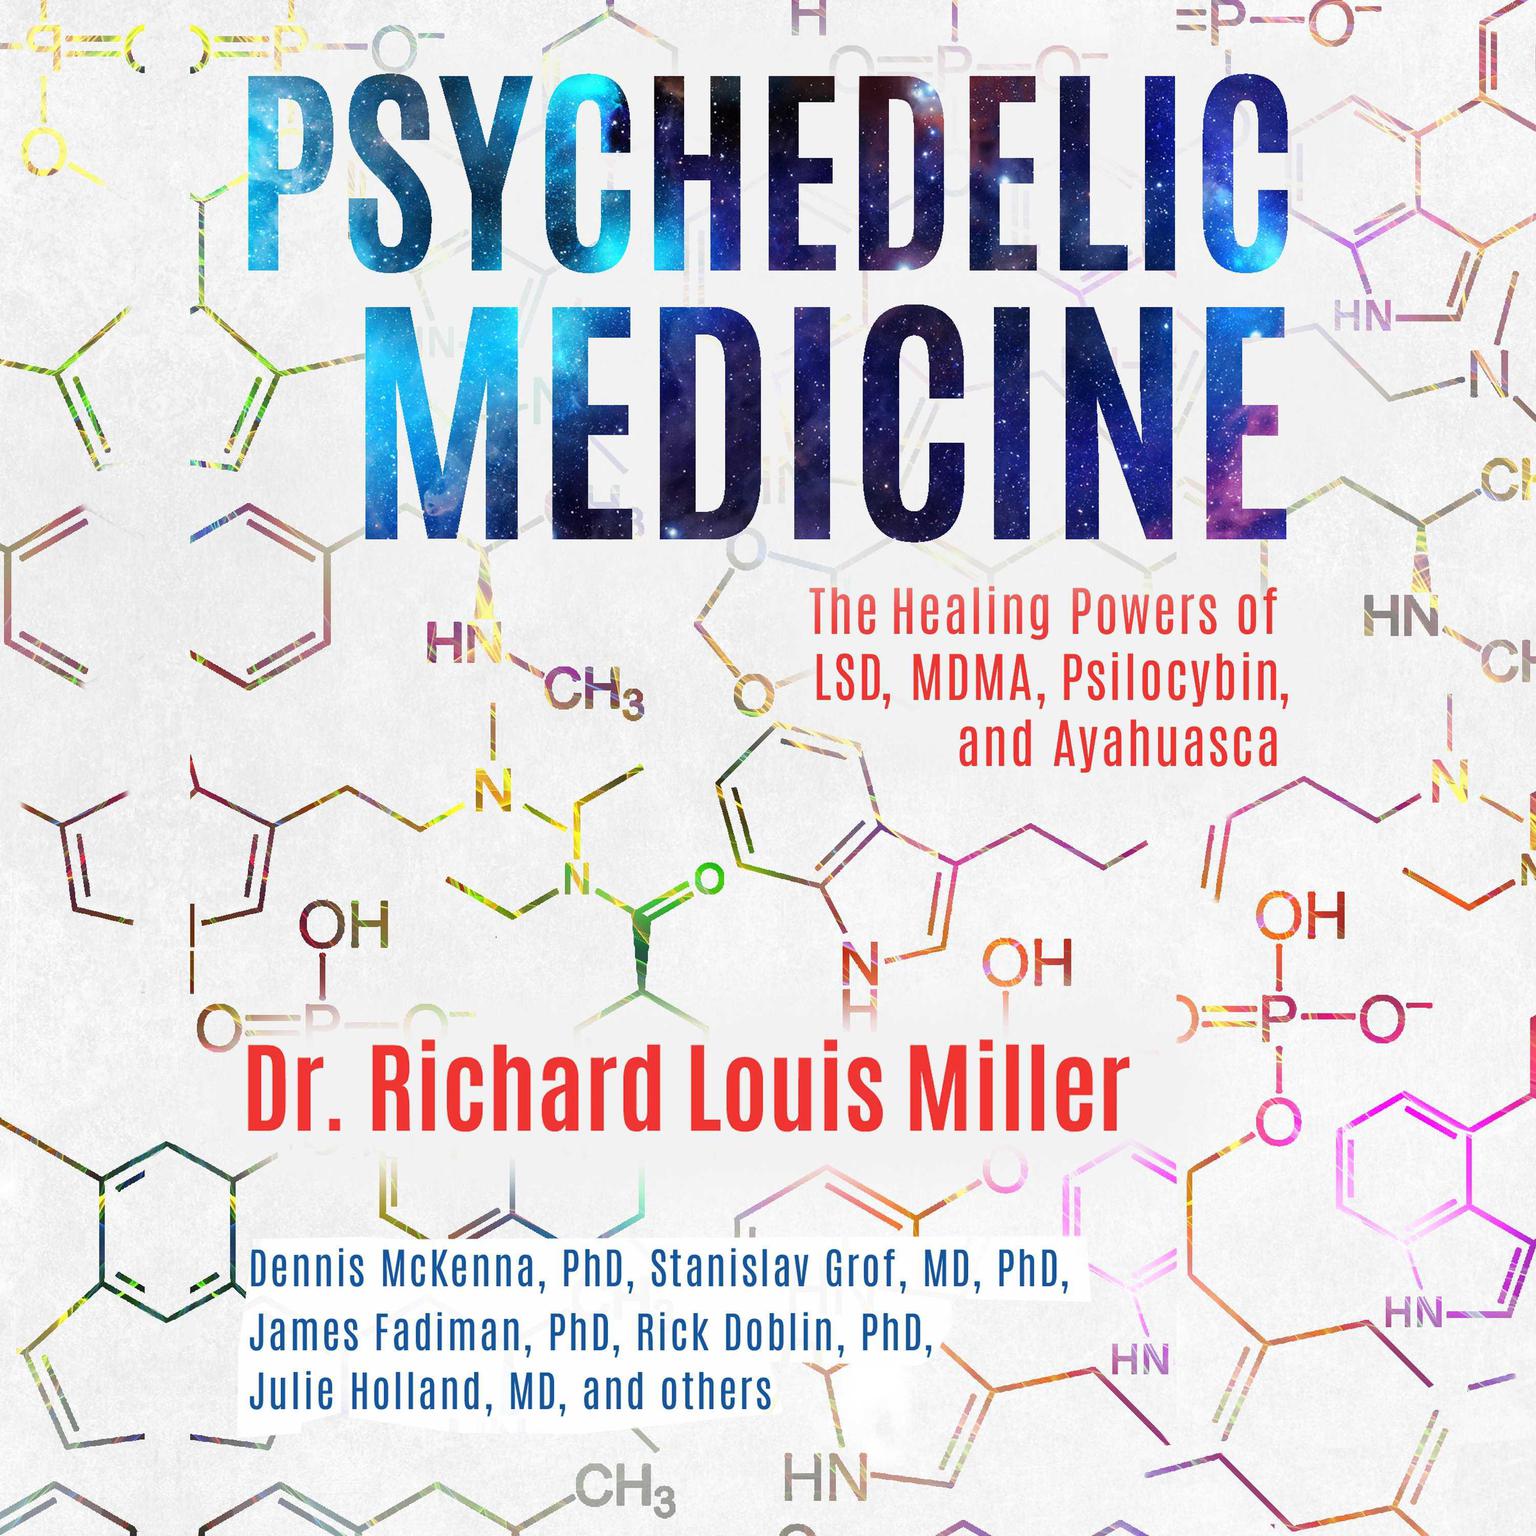 Psychedelic Medicine: The Healing Powers of LSD, MDMA, Psilocybin, and Ayahuasca Audiobook, by Richard Louis Miller